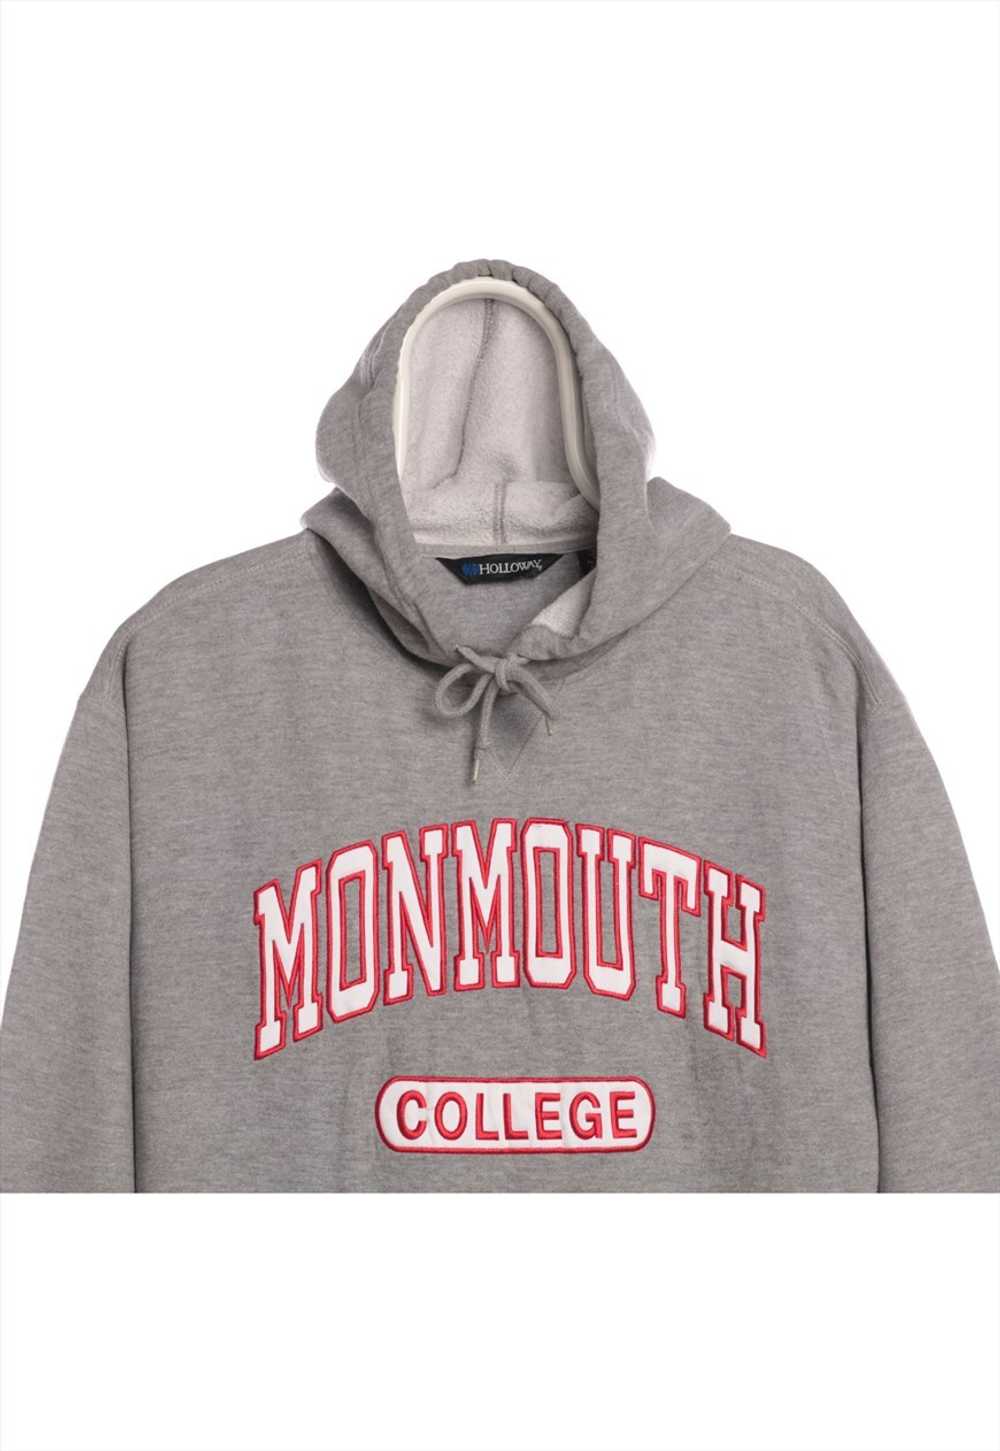 Vintage 90's Holloway Hoodie Embroidered College - image 2